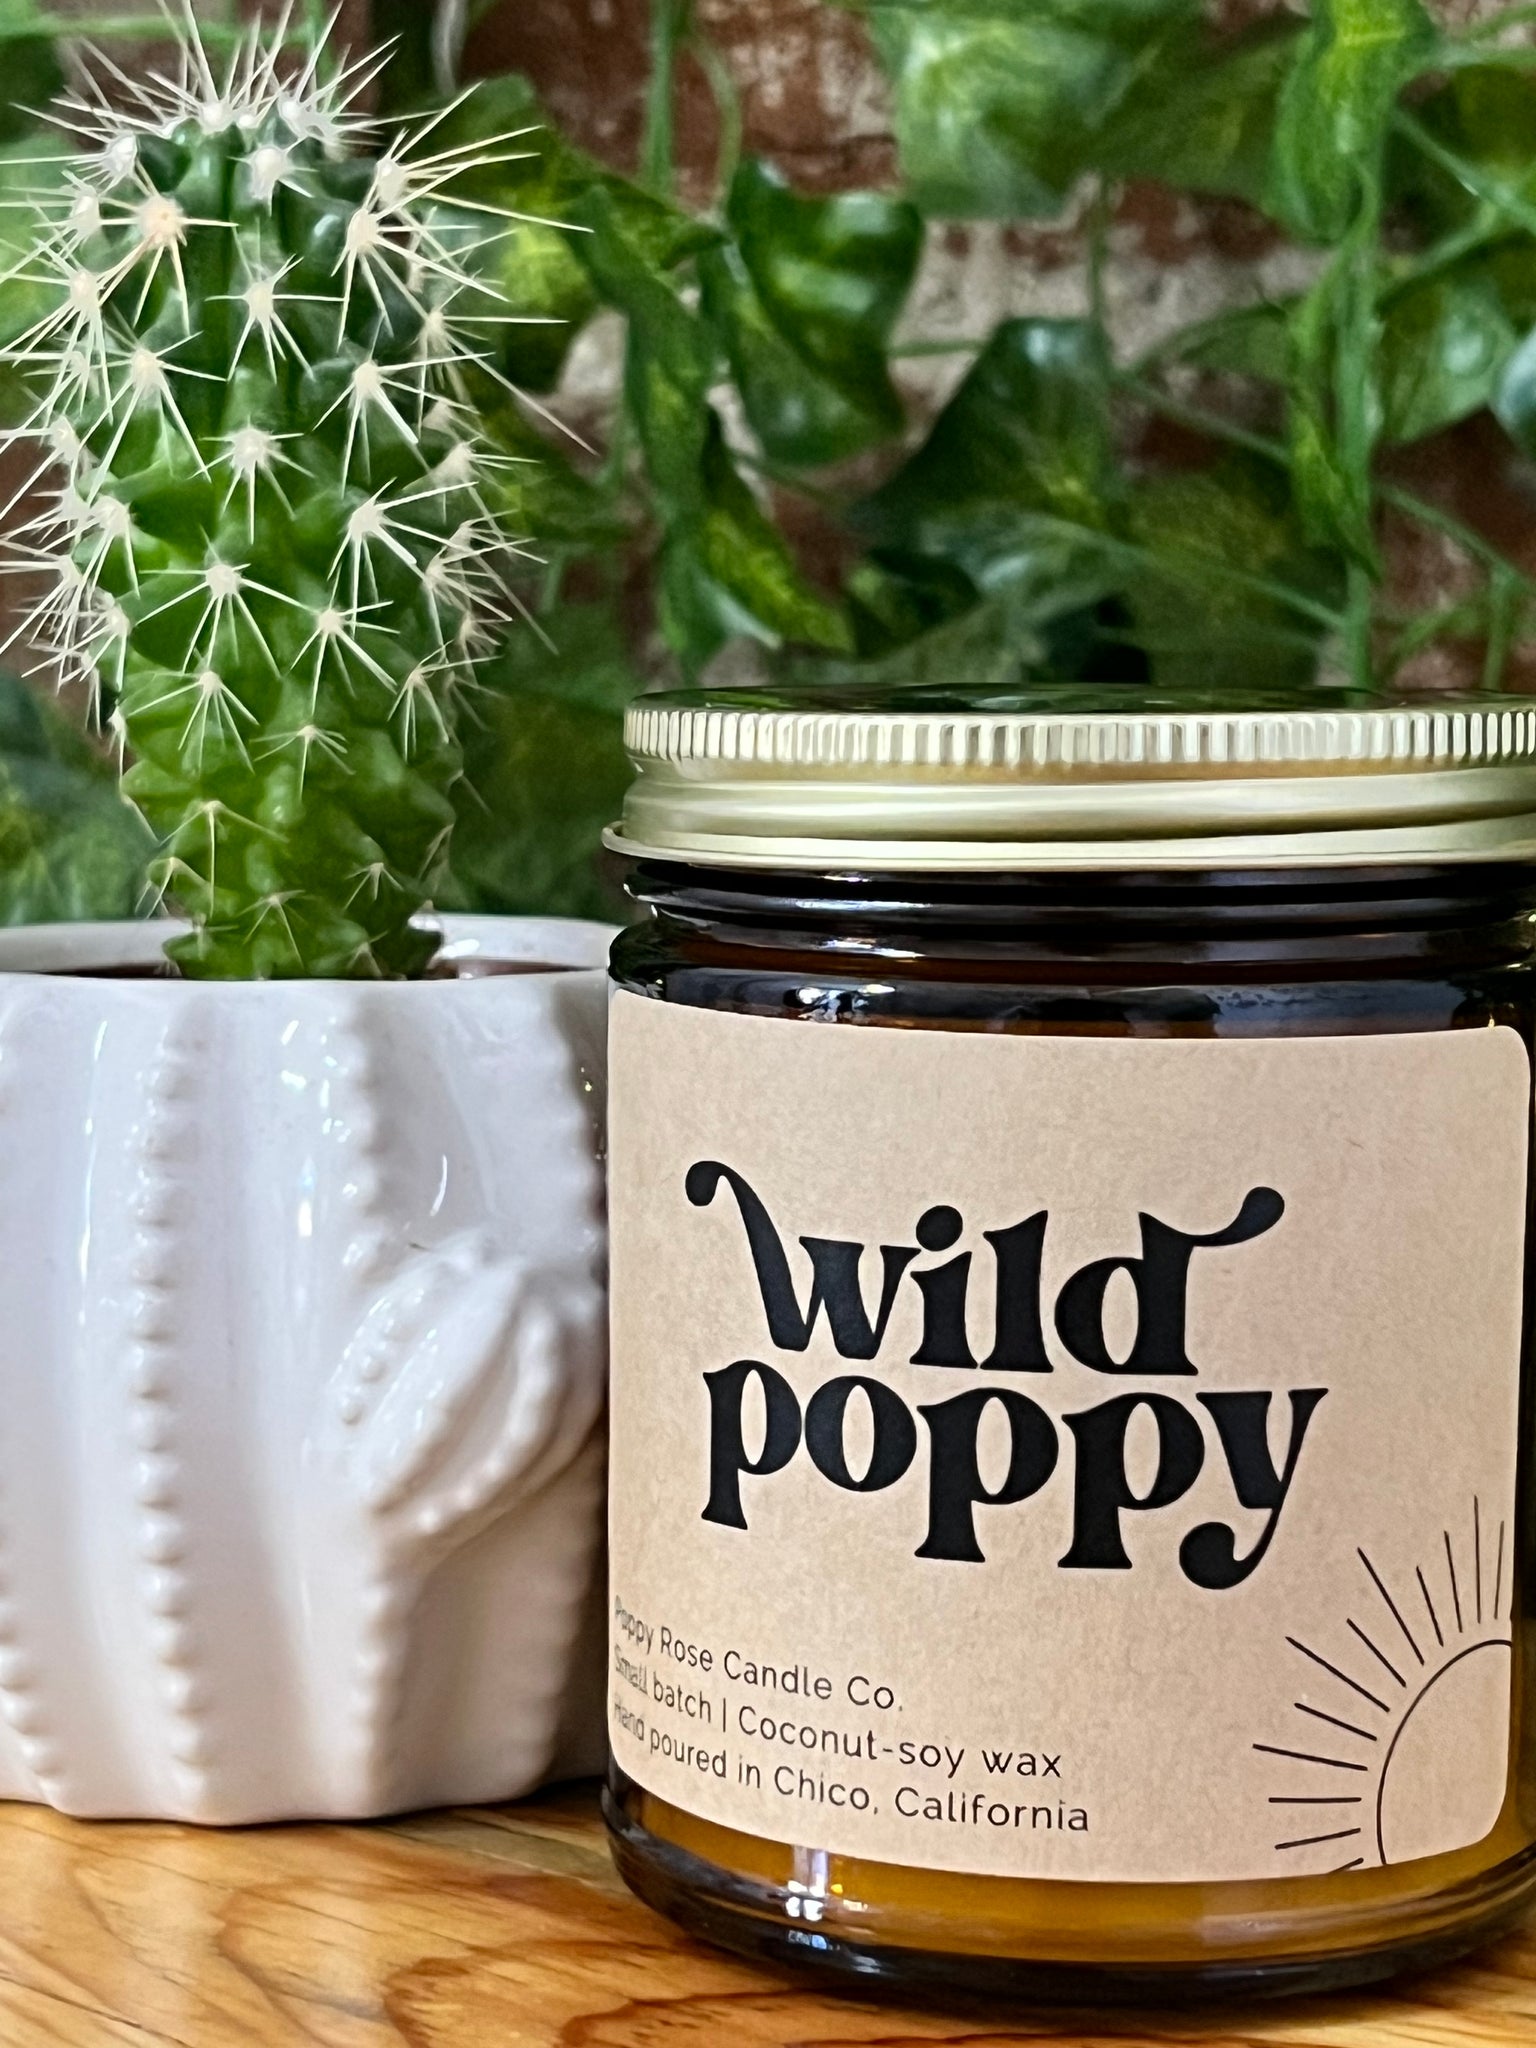 Poppy Rose Candle Co